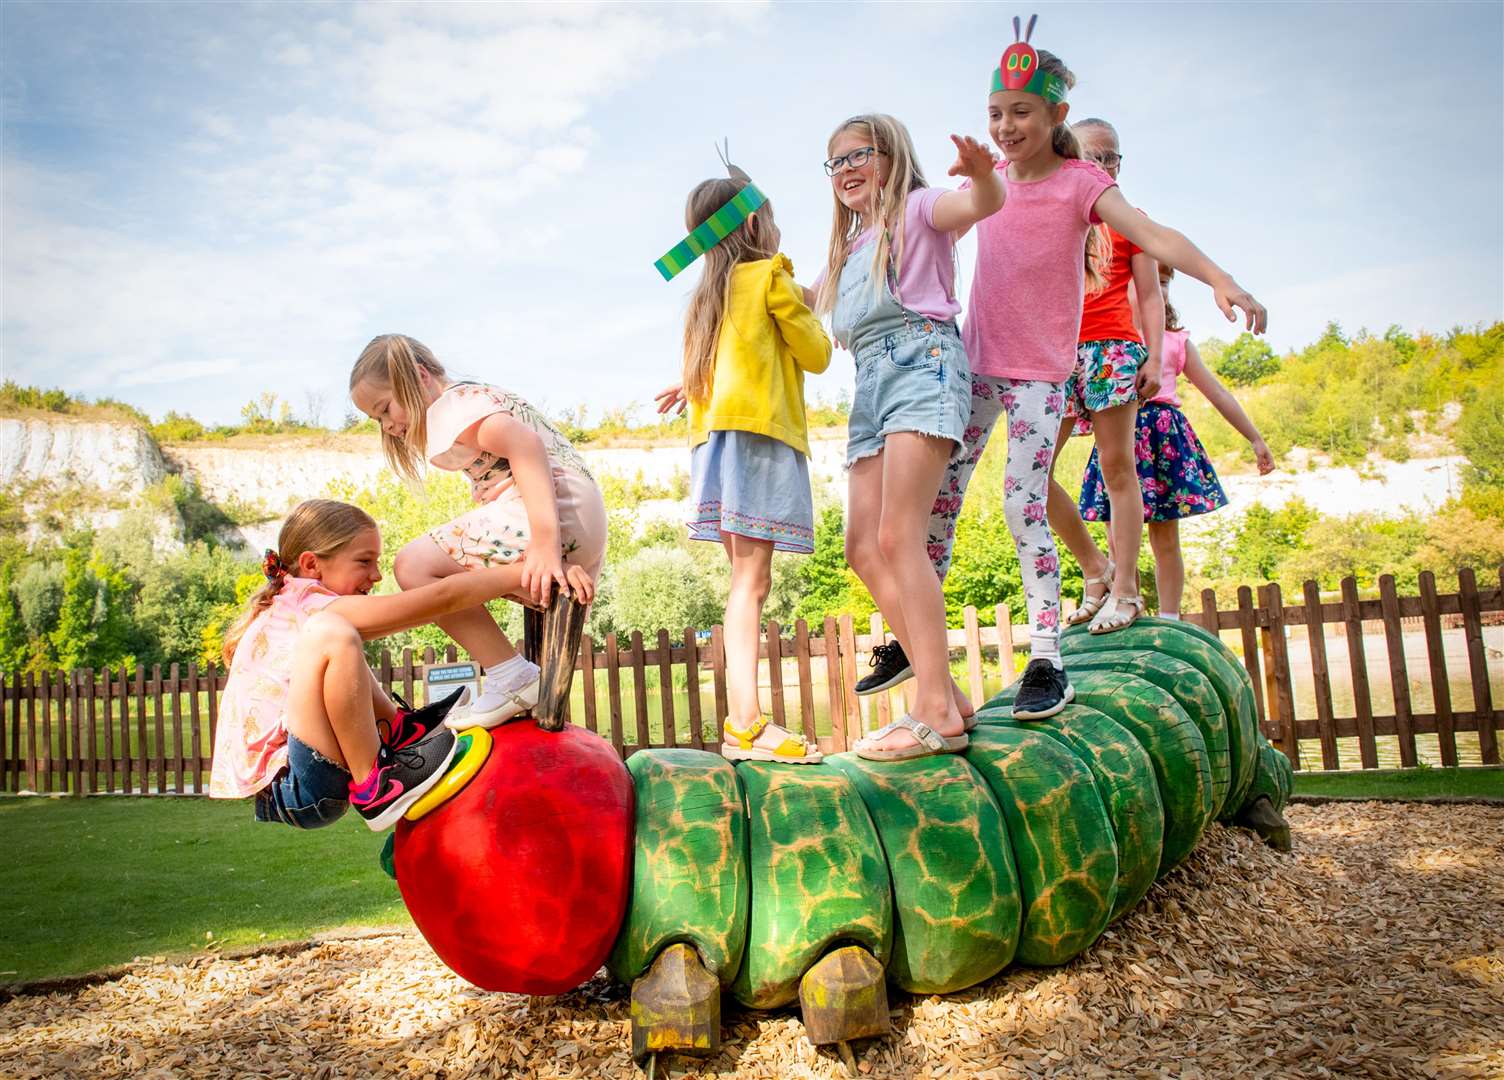 The Very Hungry Caterpillar at Bluewater